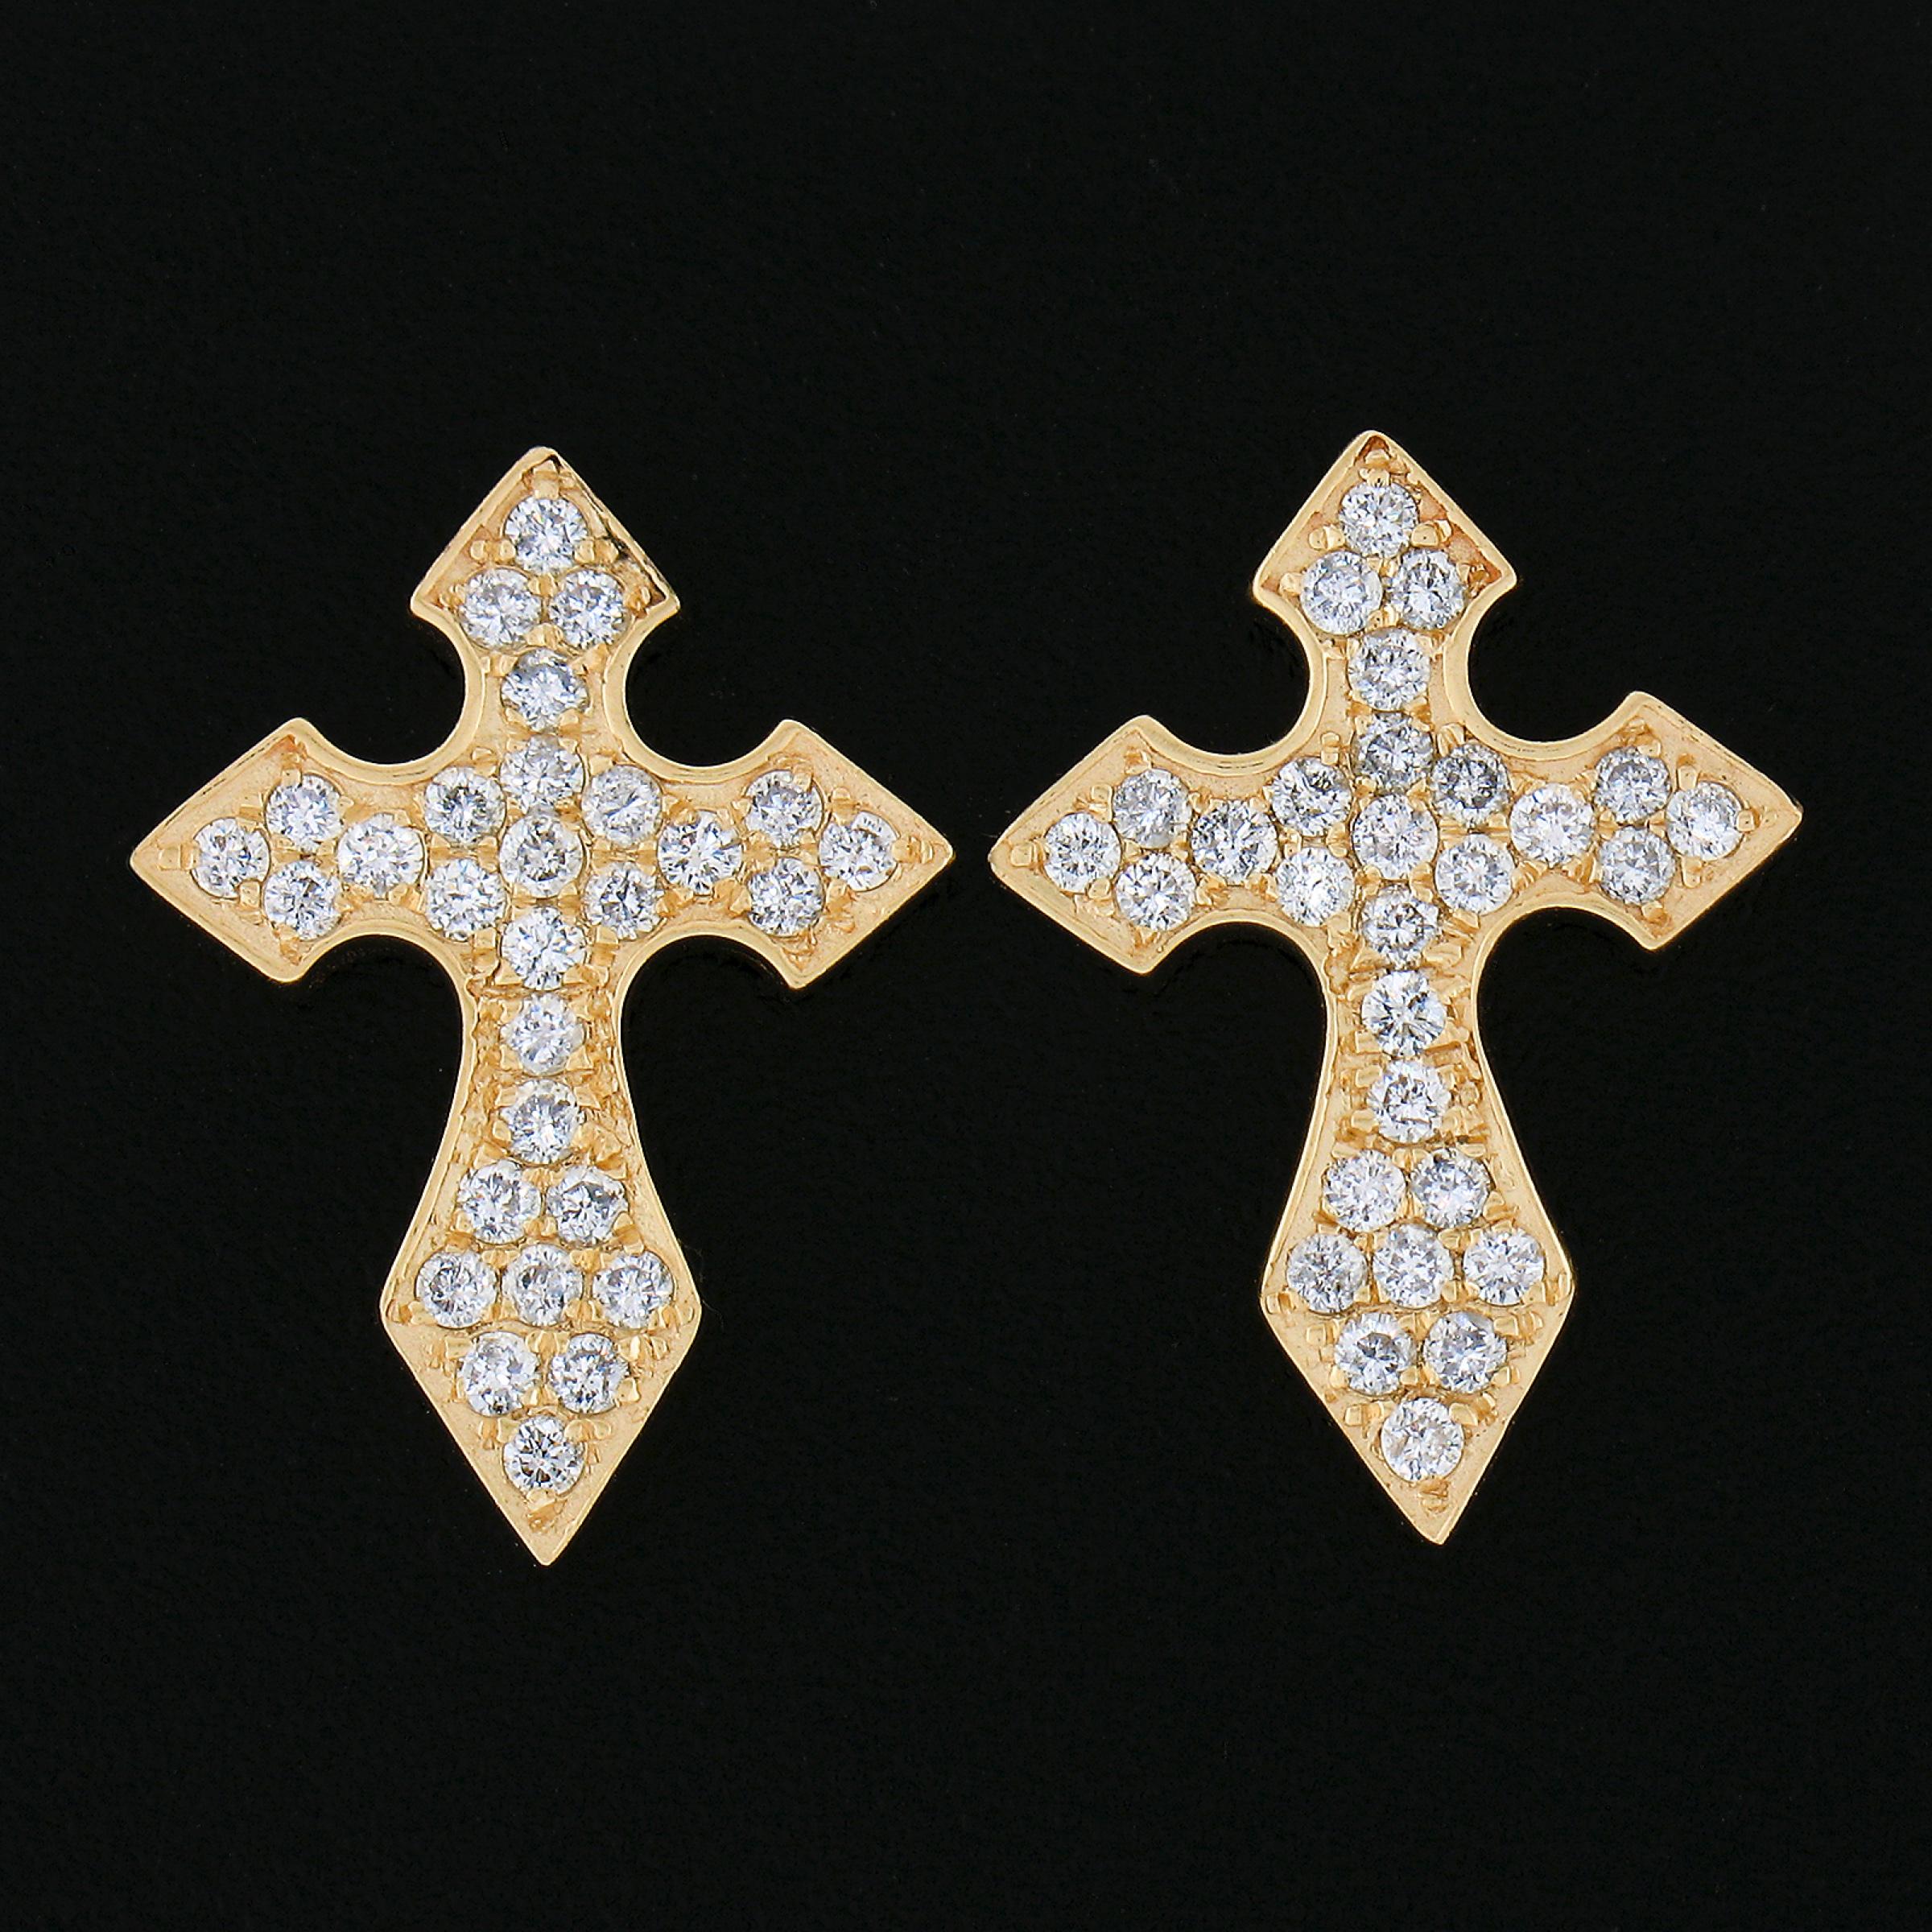 Here we have a beautiful pair of stud earrings that are well crafted from solid 14k yellow gold, featuring an elegant cross design that is drenched with very fine quality diamonds throughout. These fiery diamonds total approximately 0.70 carats in